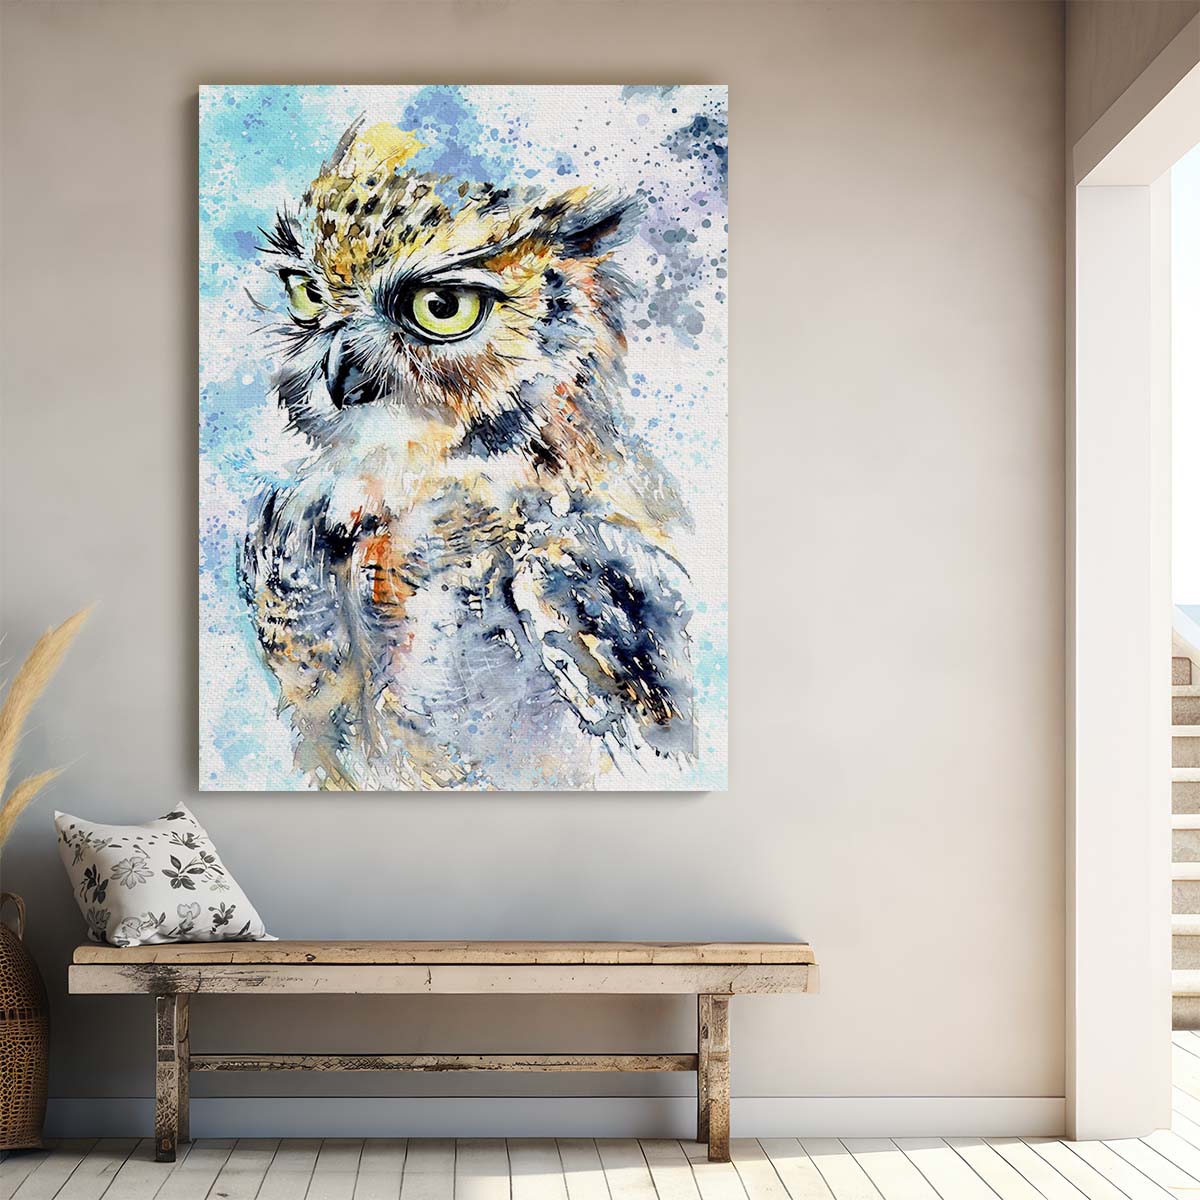 Owl Watercolor Painting Wall Art by Luxuriance Designs. Made in USA.